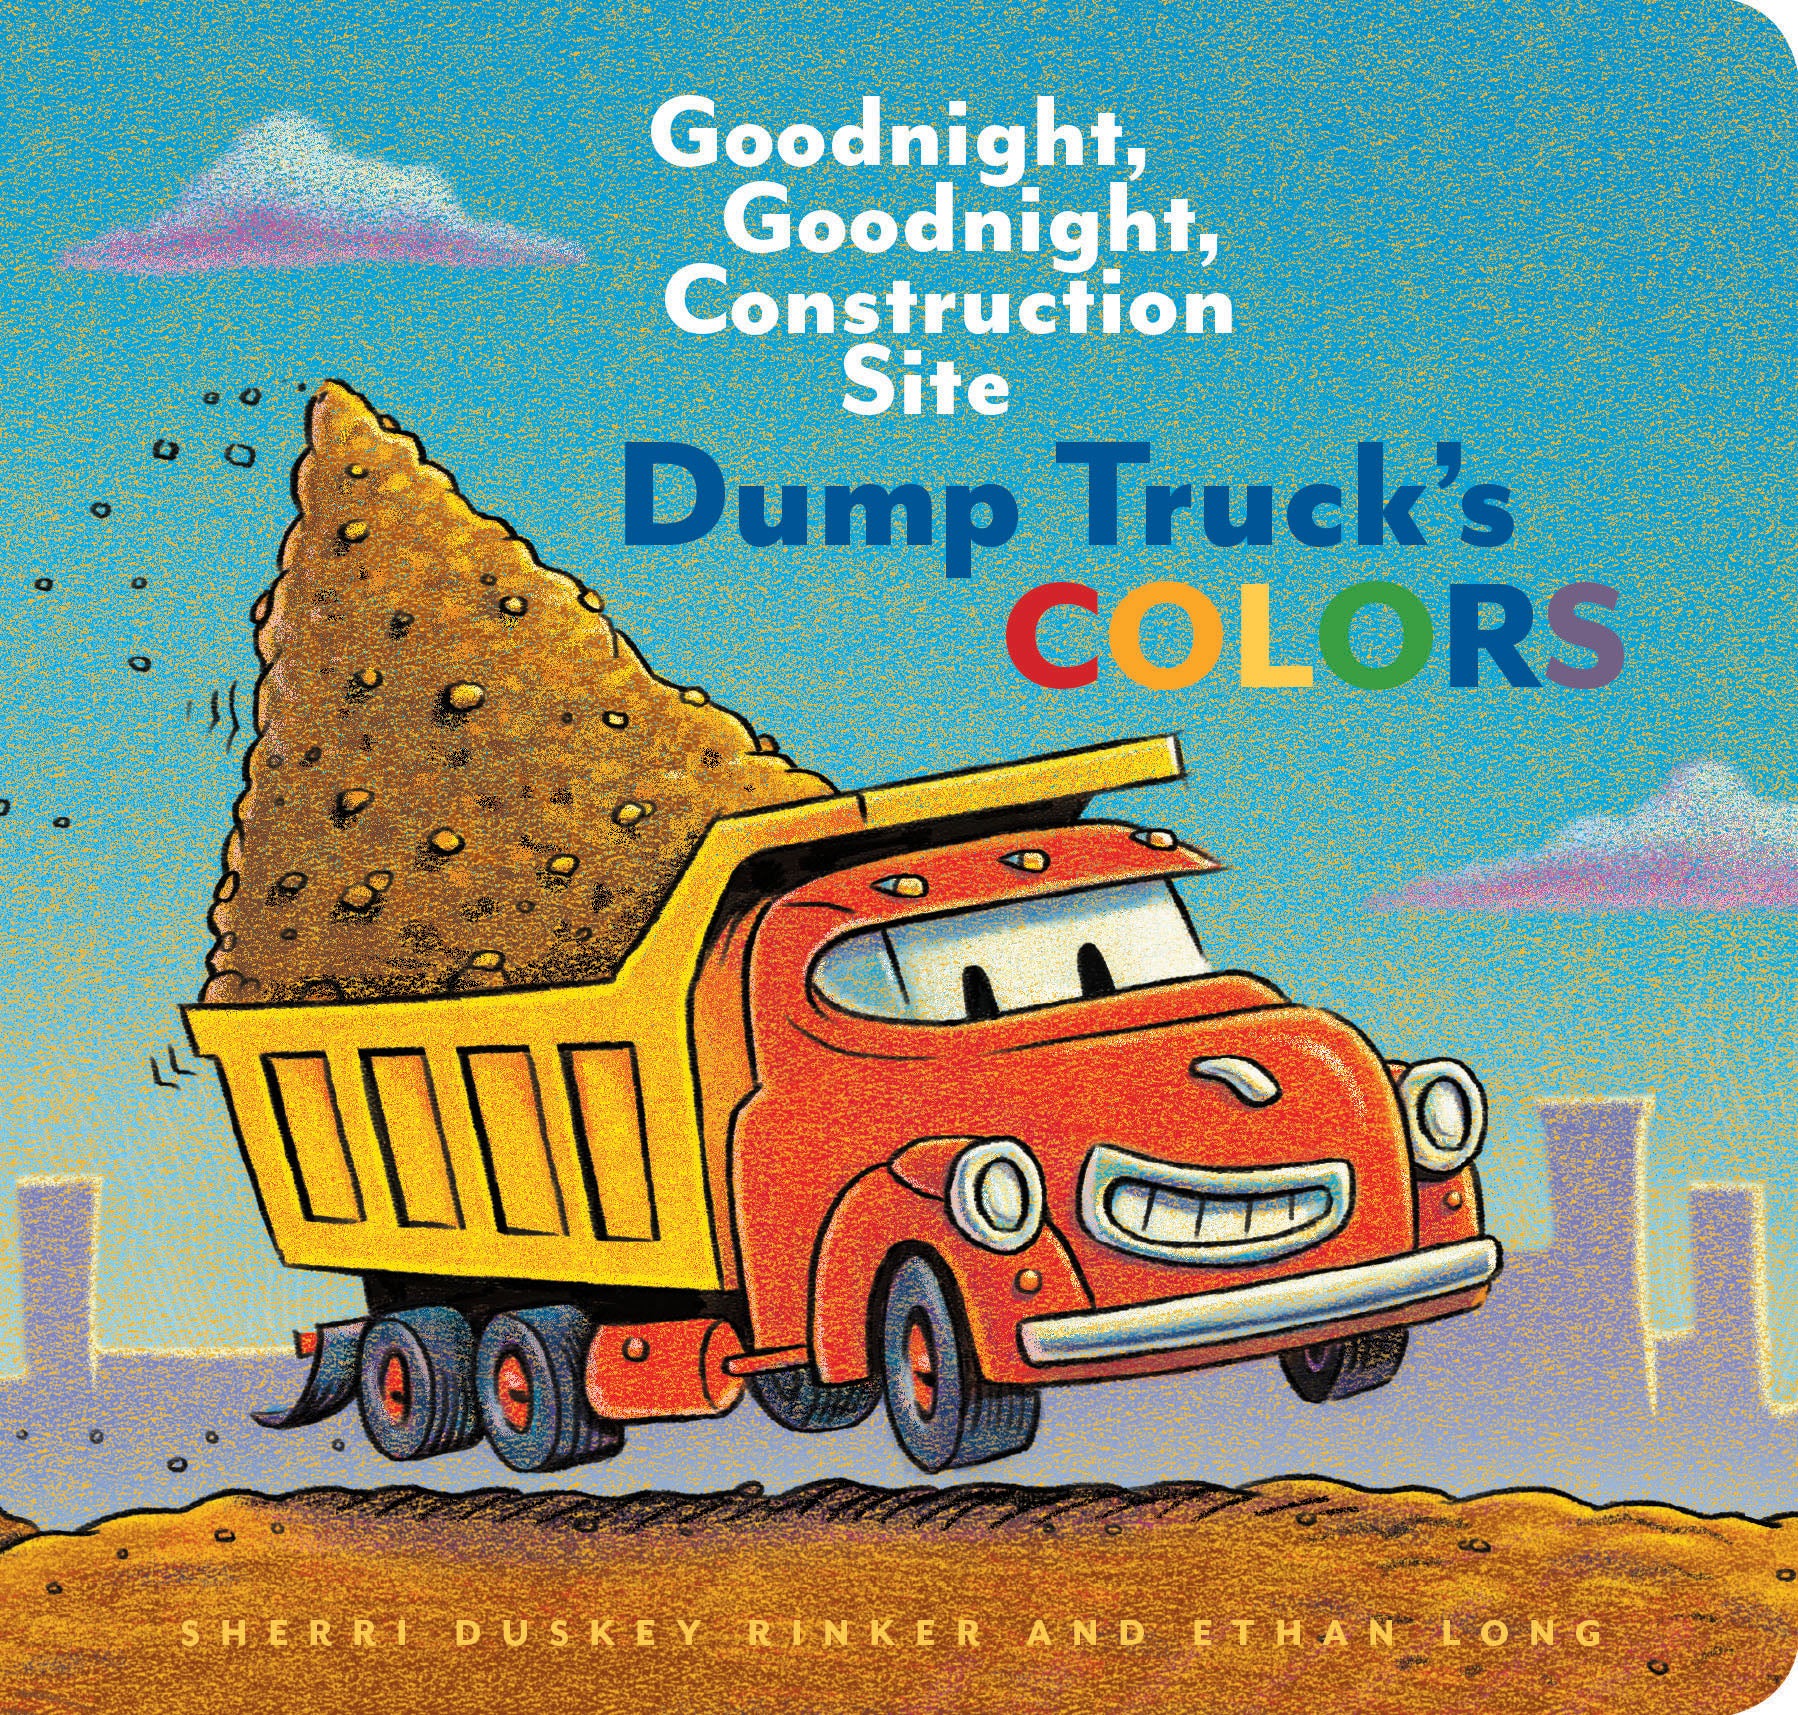 goodnight, goodnight construction site dump truck's colors